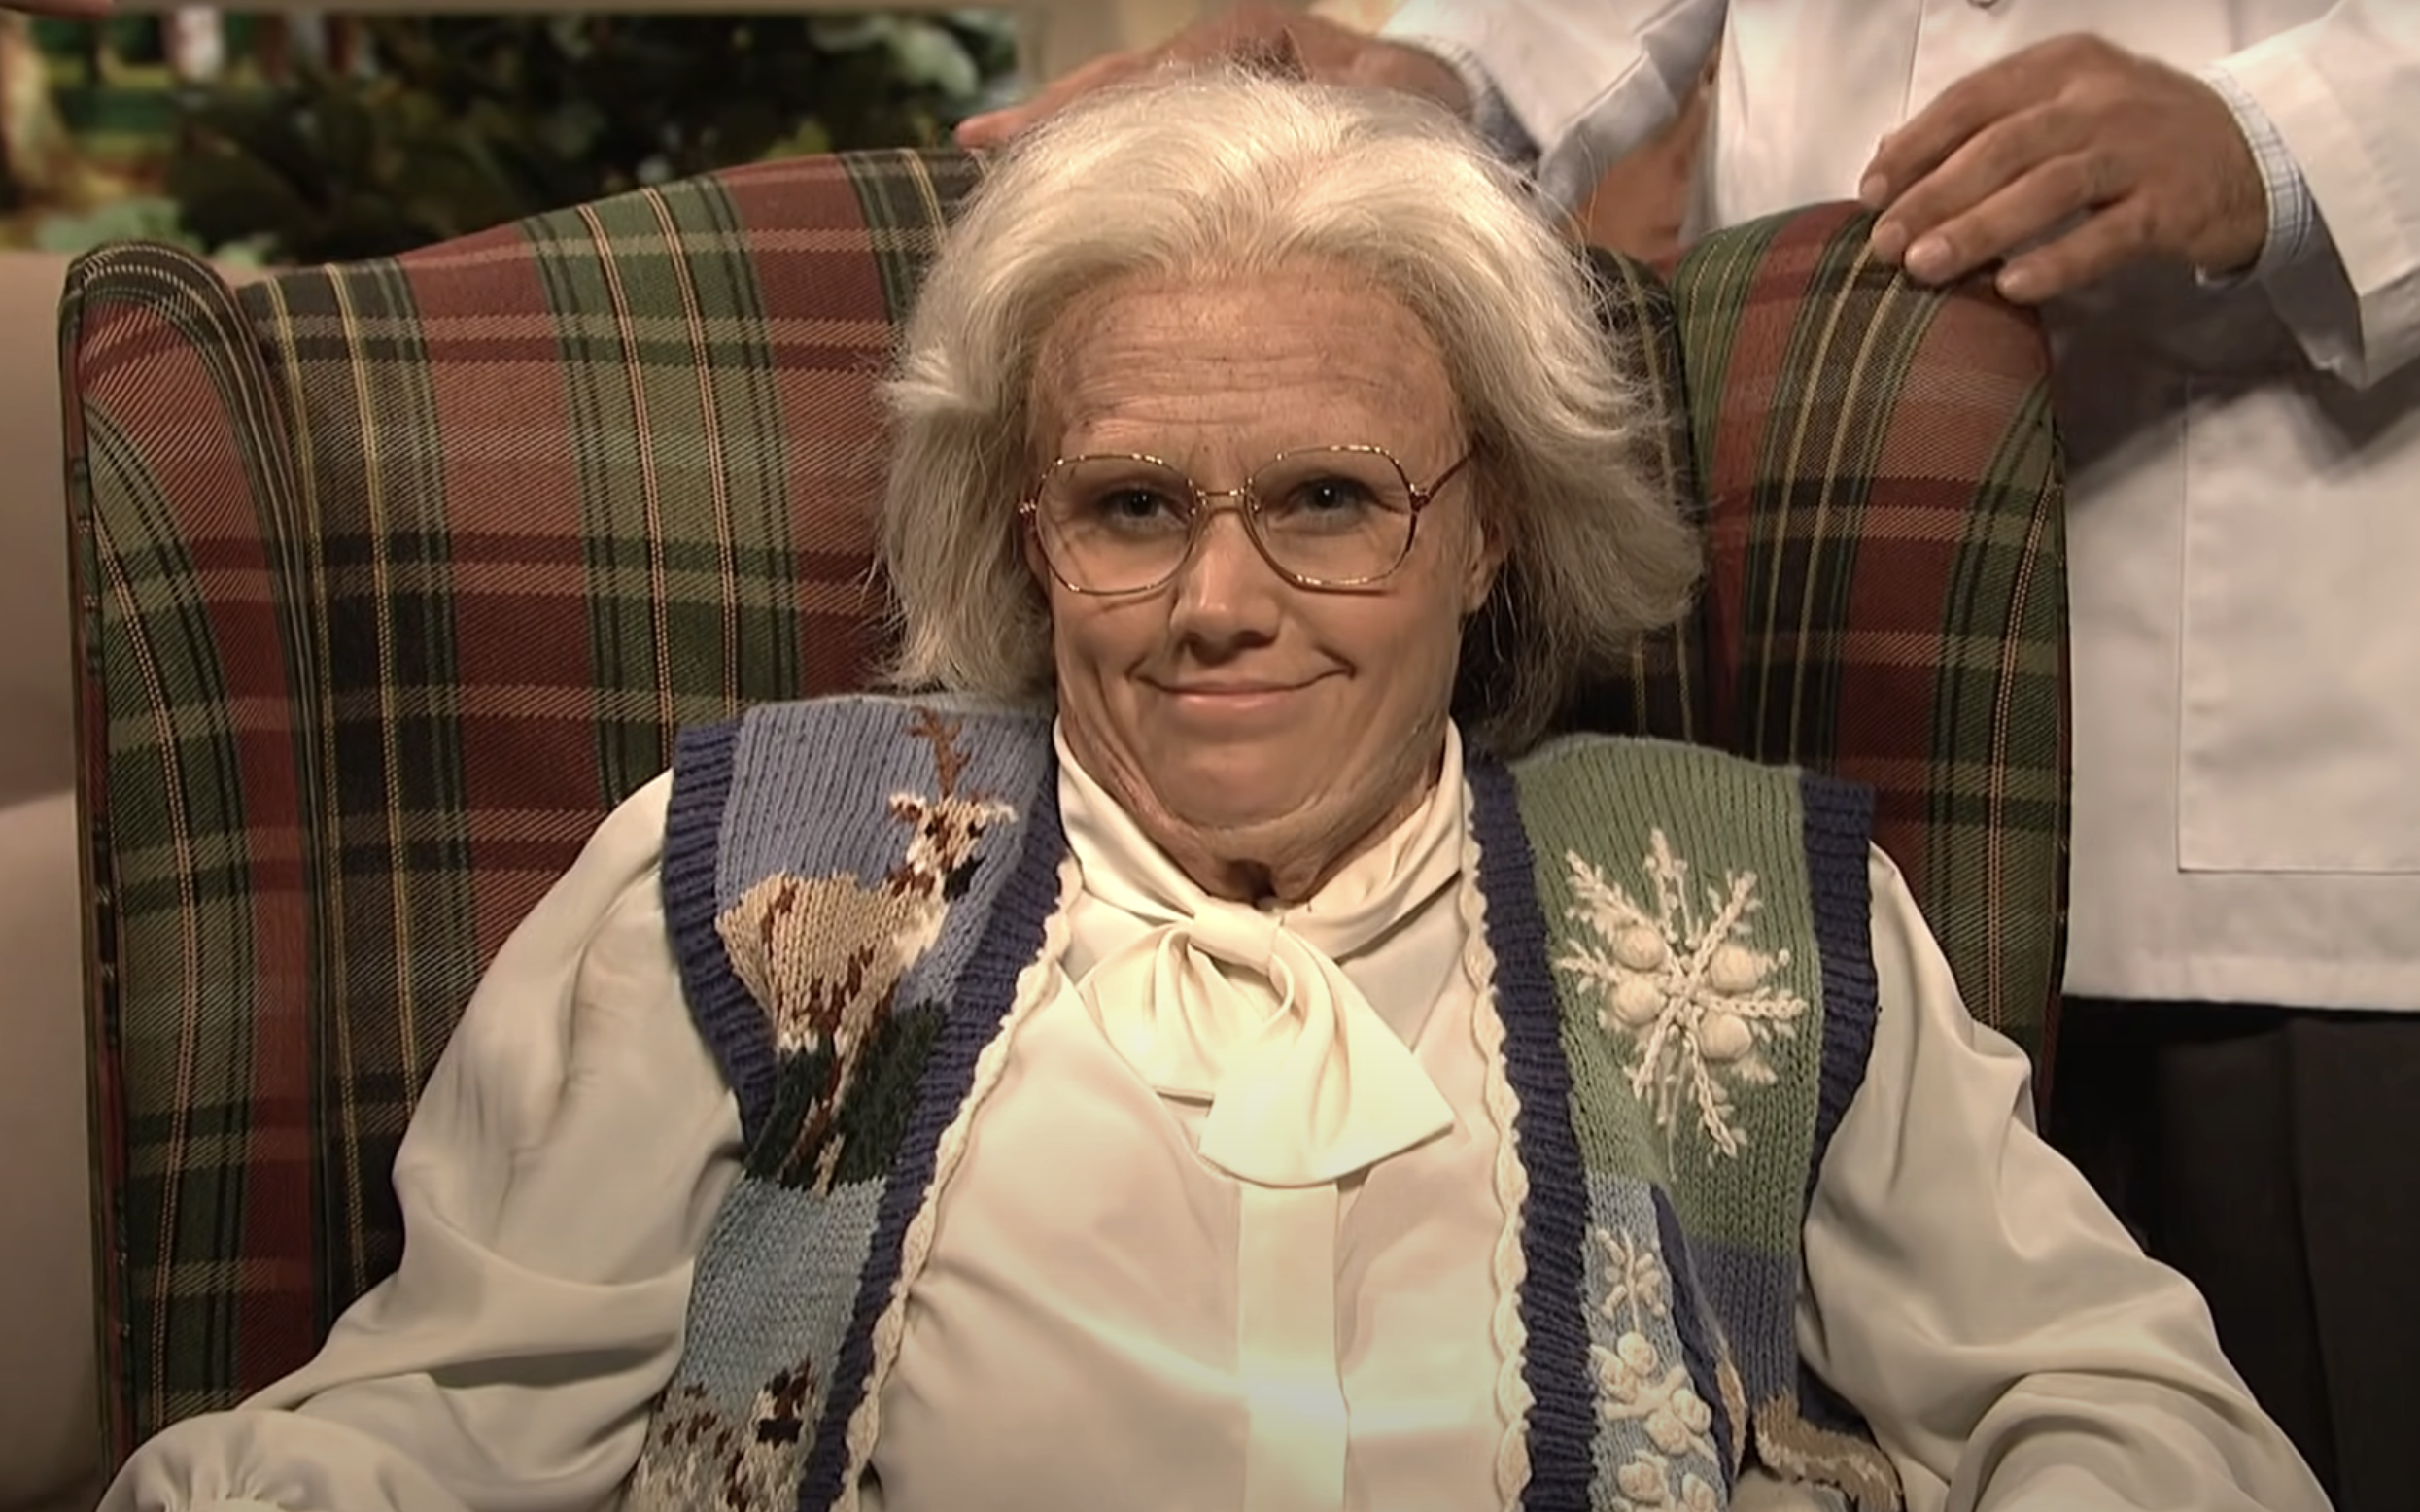 Kate McKinnon on SNL as an older lady with a flirty expression